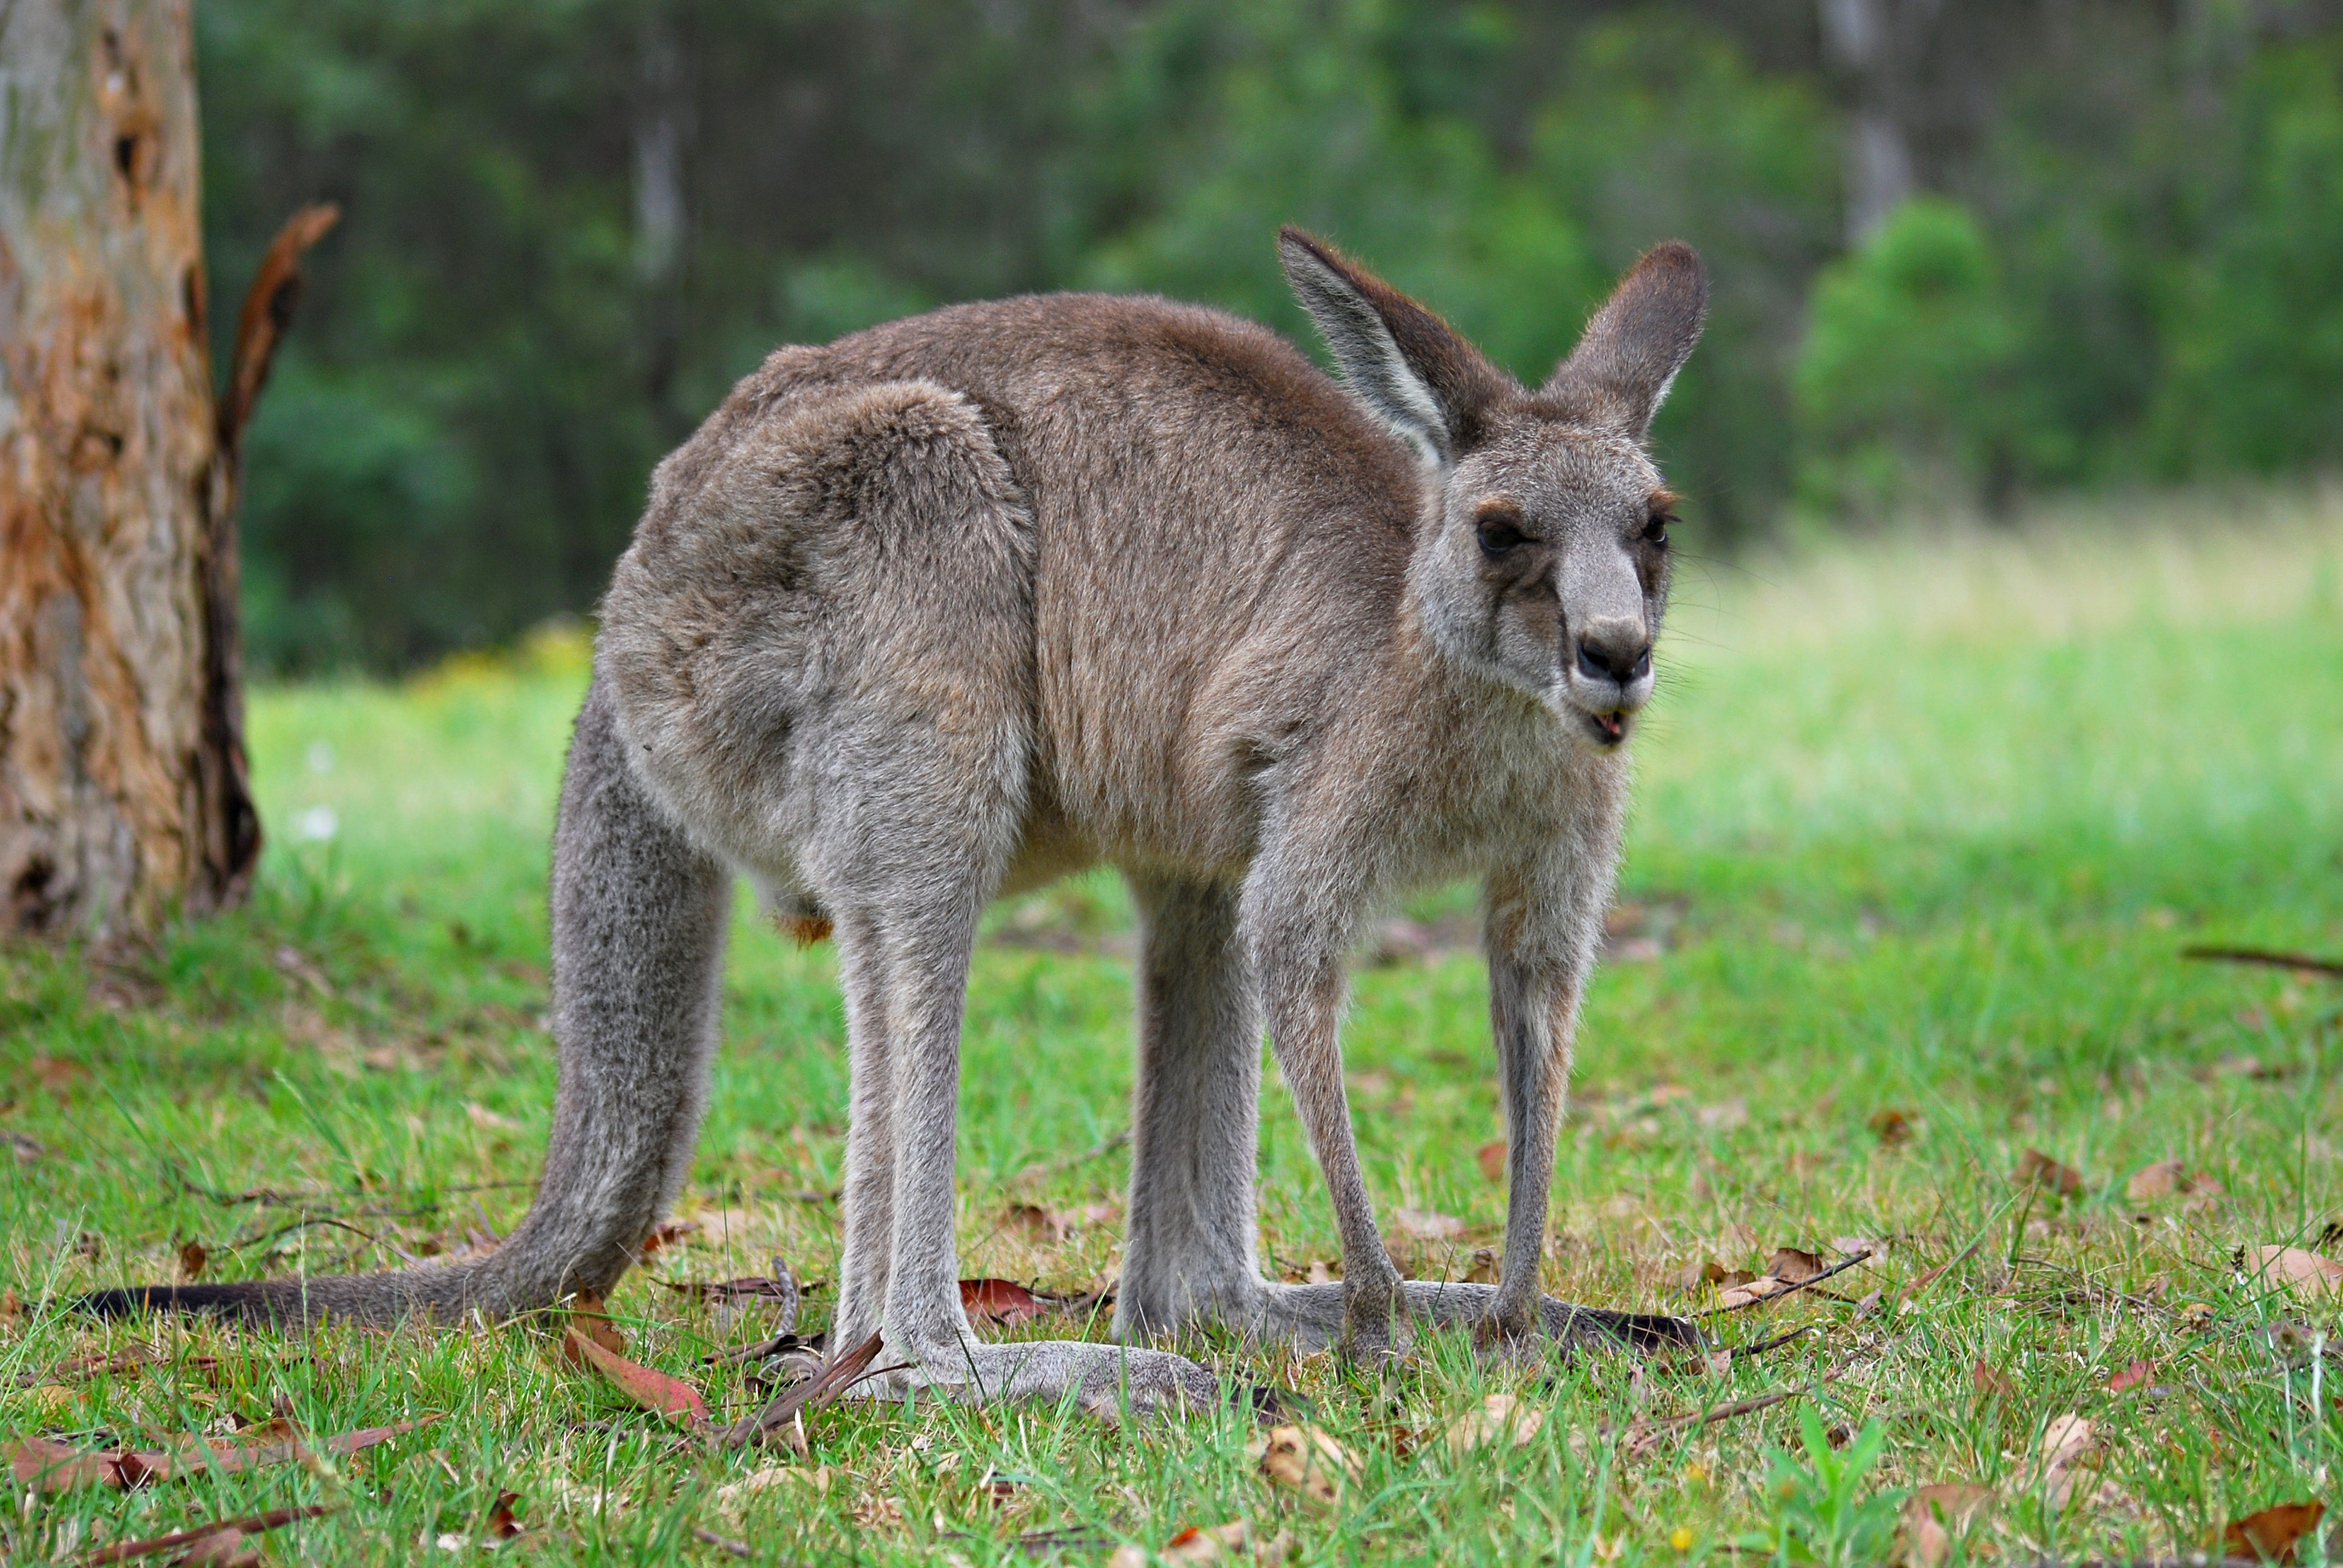 What are adult females of the kangaroo species called?